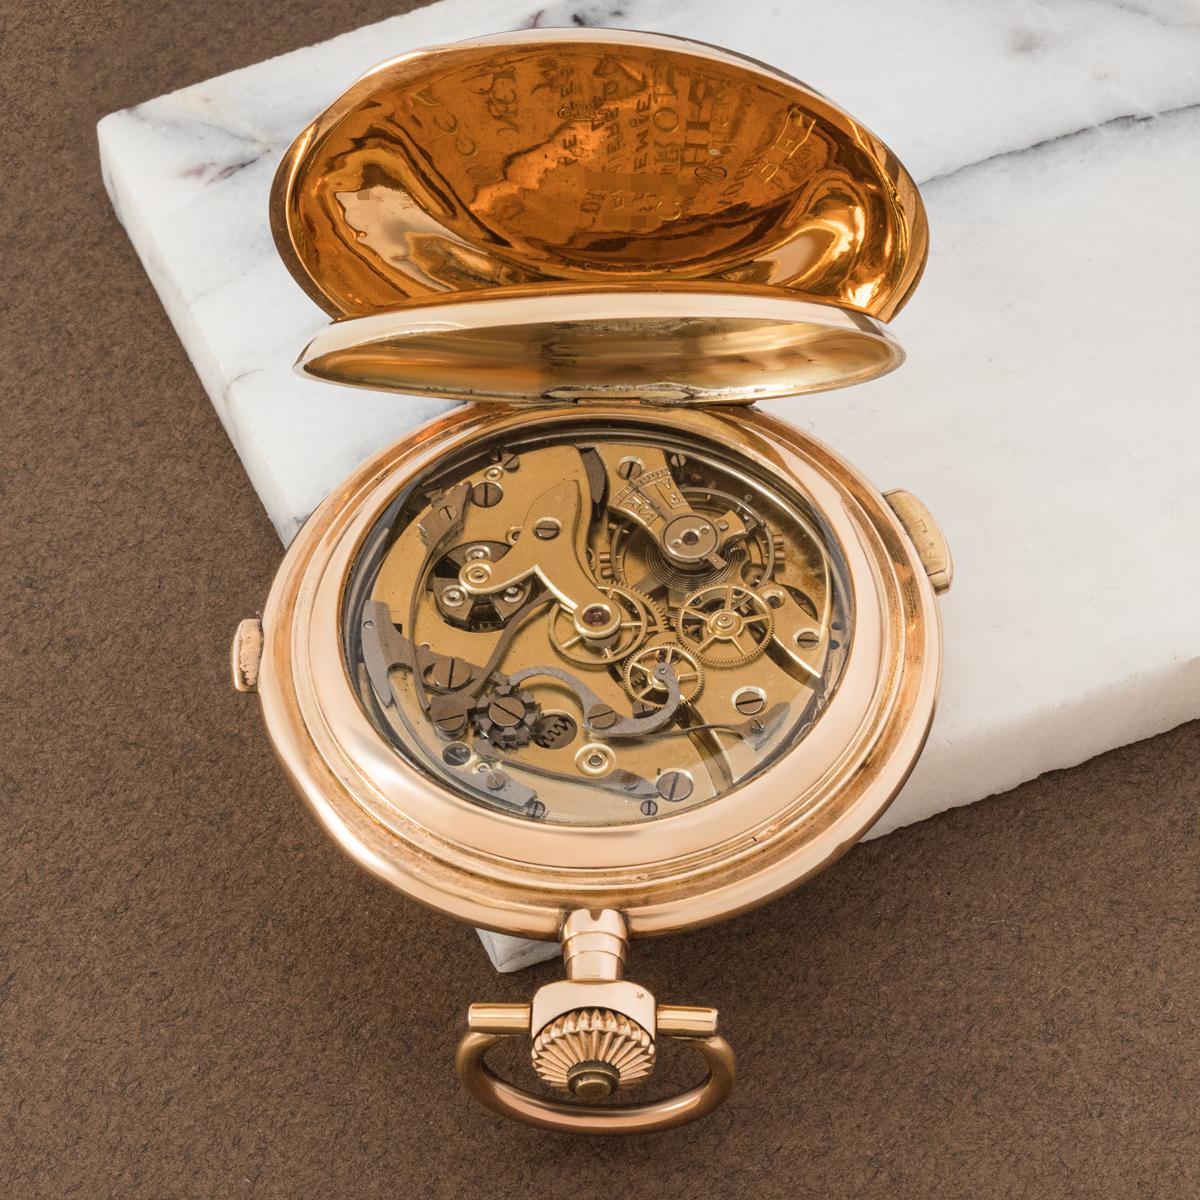 A Rose Gold Quarter Repeater Chronograph Full Hunter Pocket Watch C1896 For Sale 2